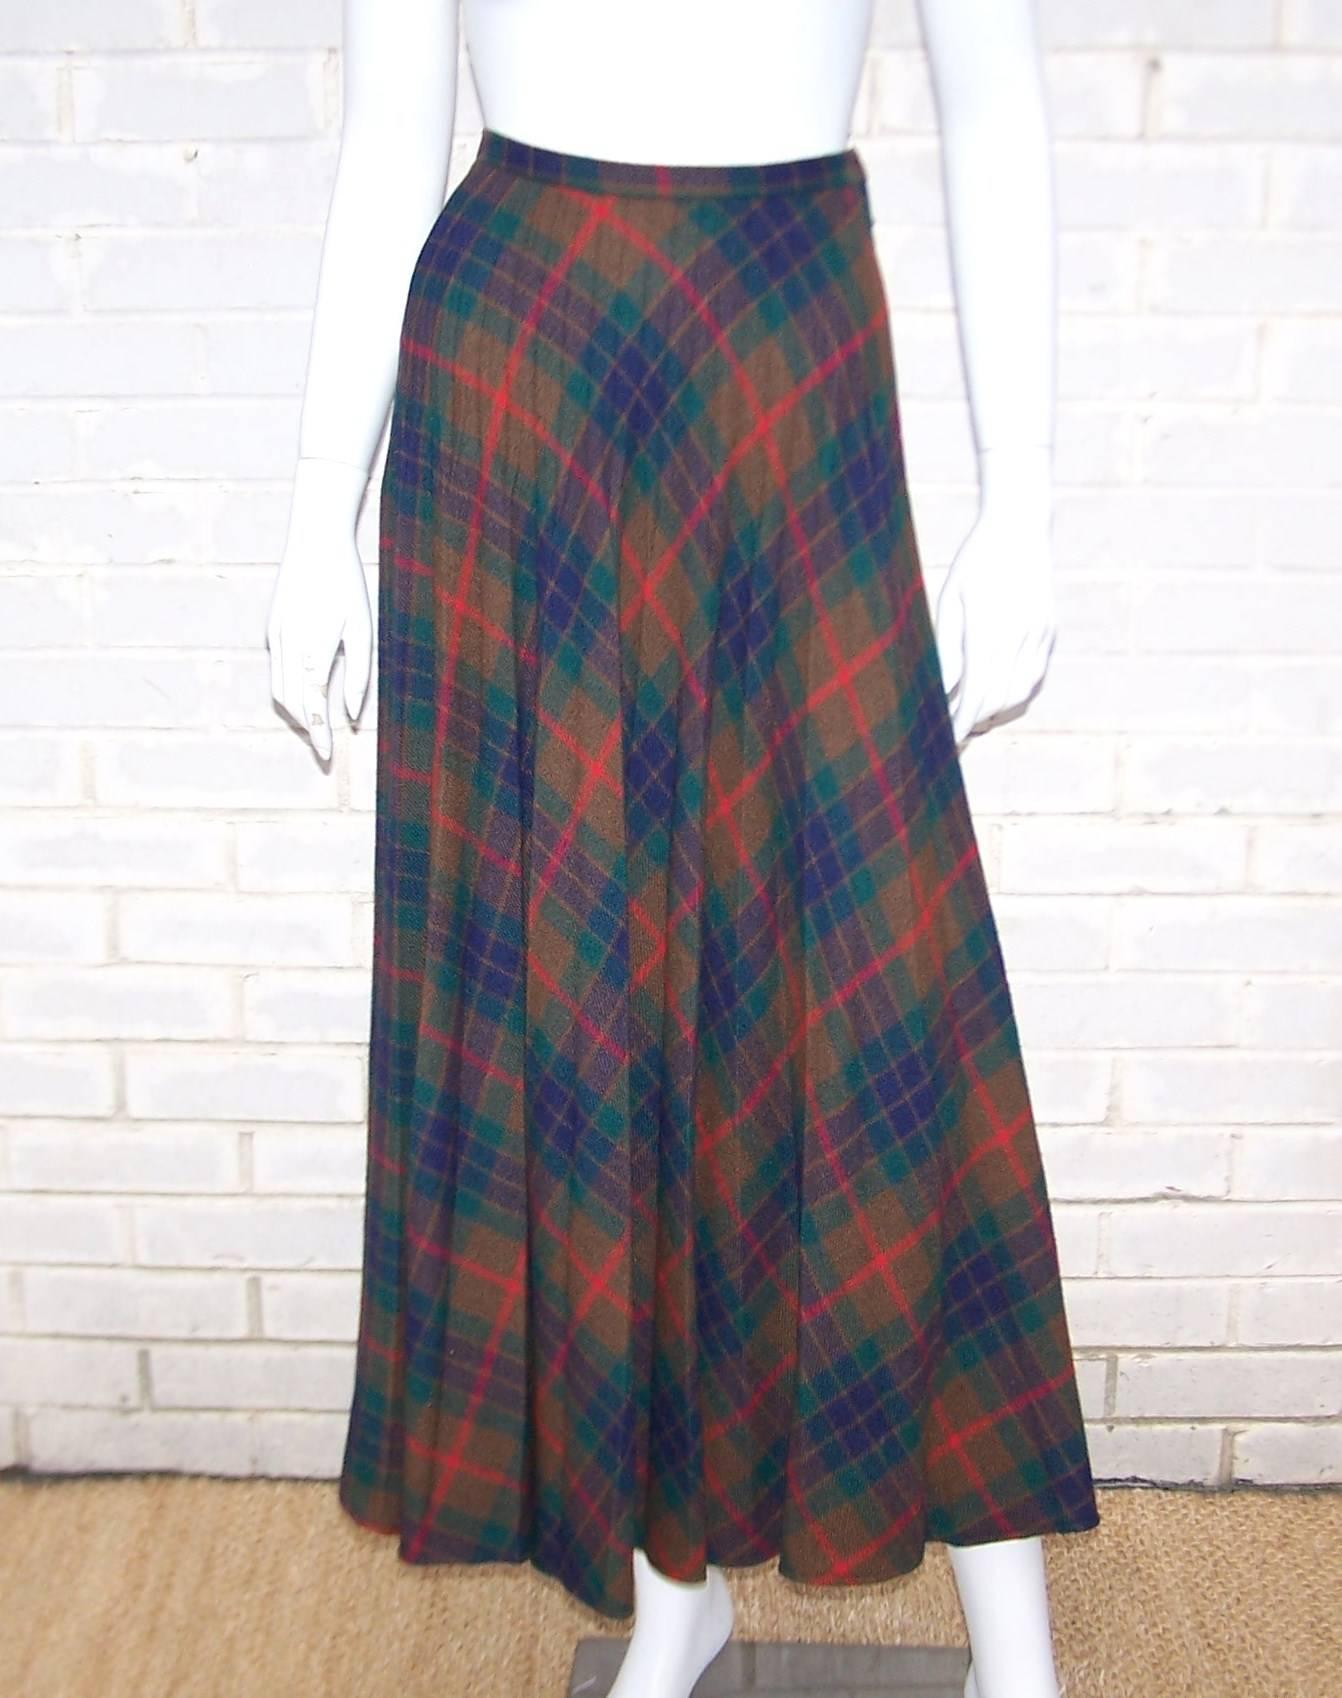 The micro pleating on this plaid wool skirt is a sartorial work of art. It is masterfully pleated to create volume and movement without bulk at the waistband and hips.  The clever design creates a great deal of movement when you walk...all the more